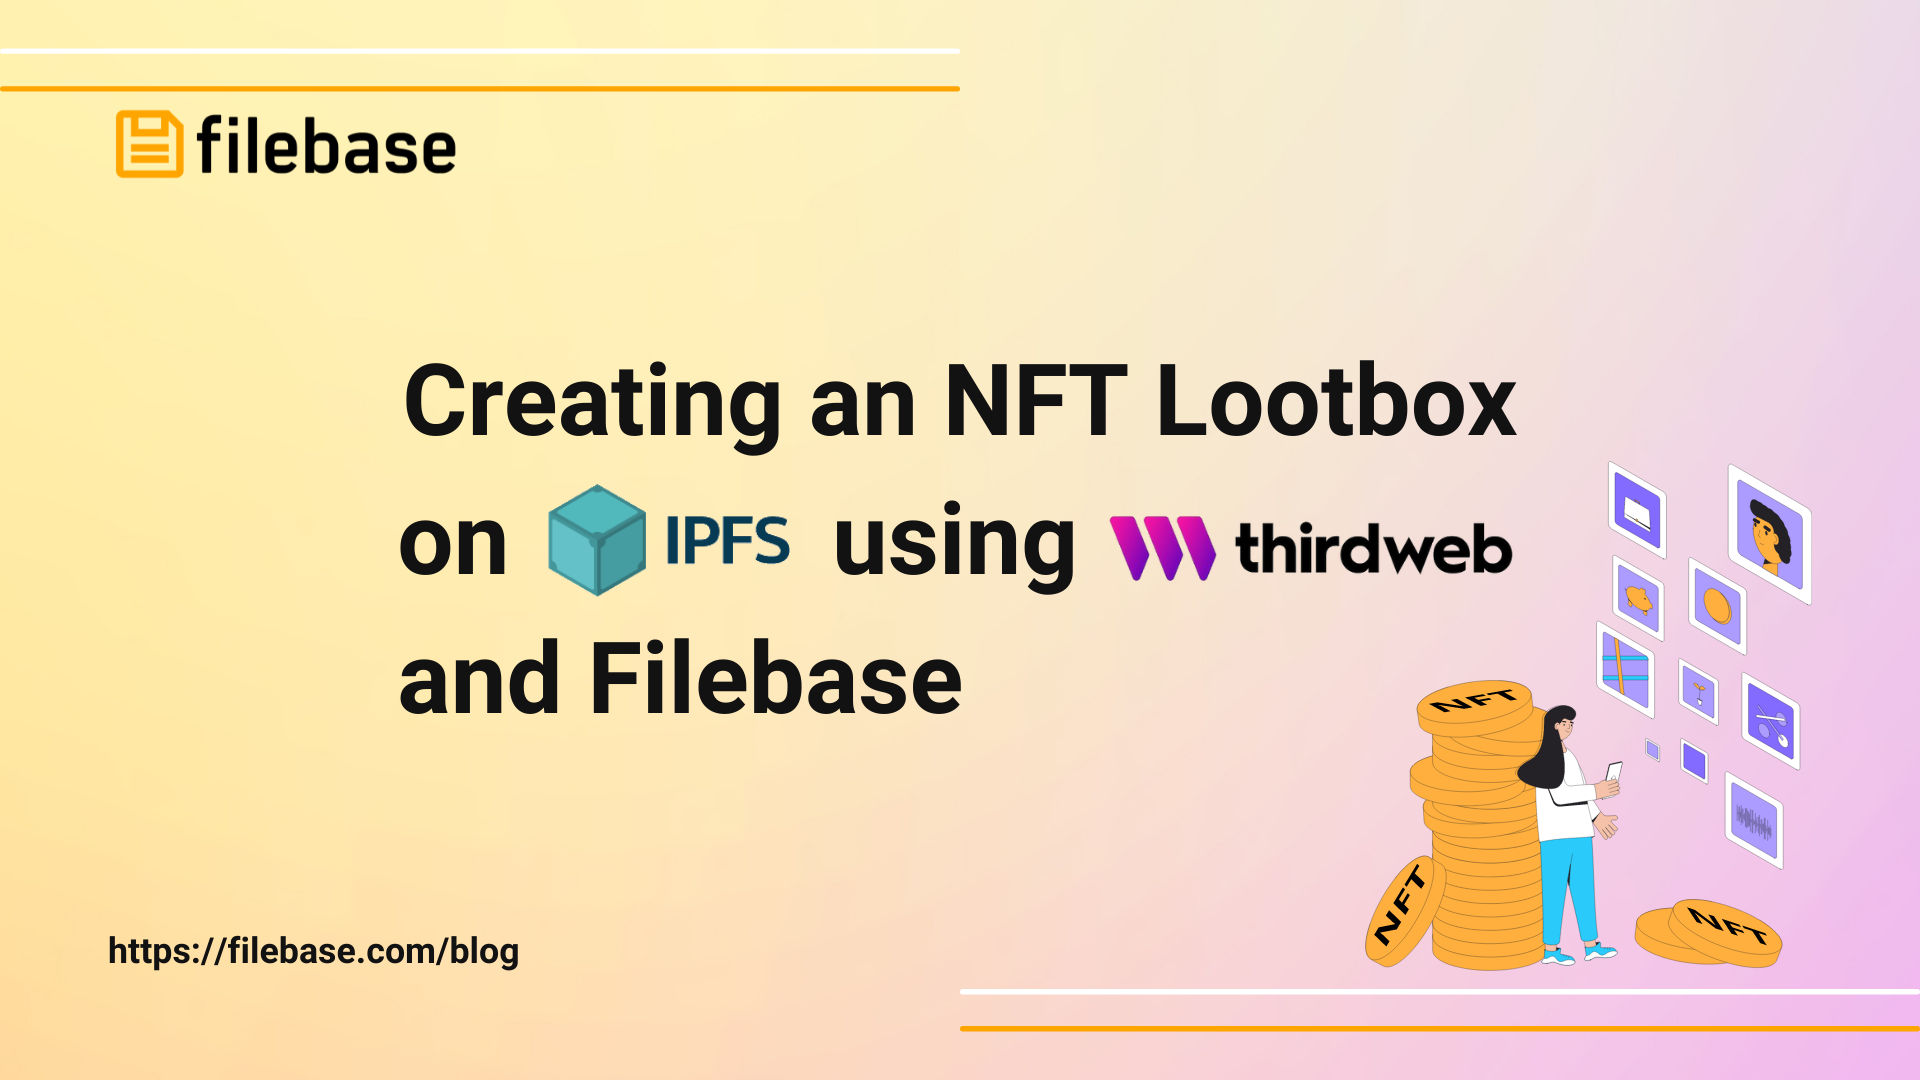 Creating an NFT Lootbox on IPFS with Filebase and Thirdweb